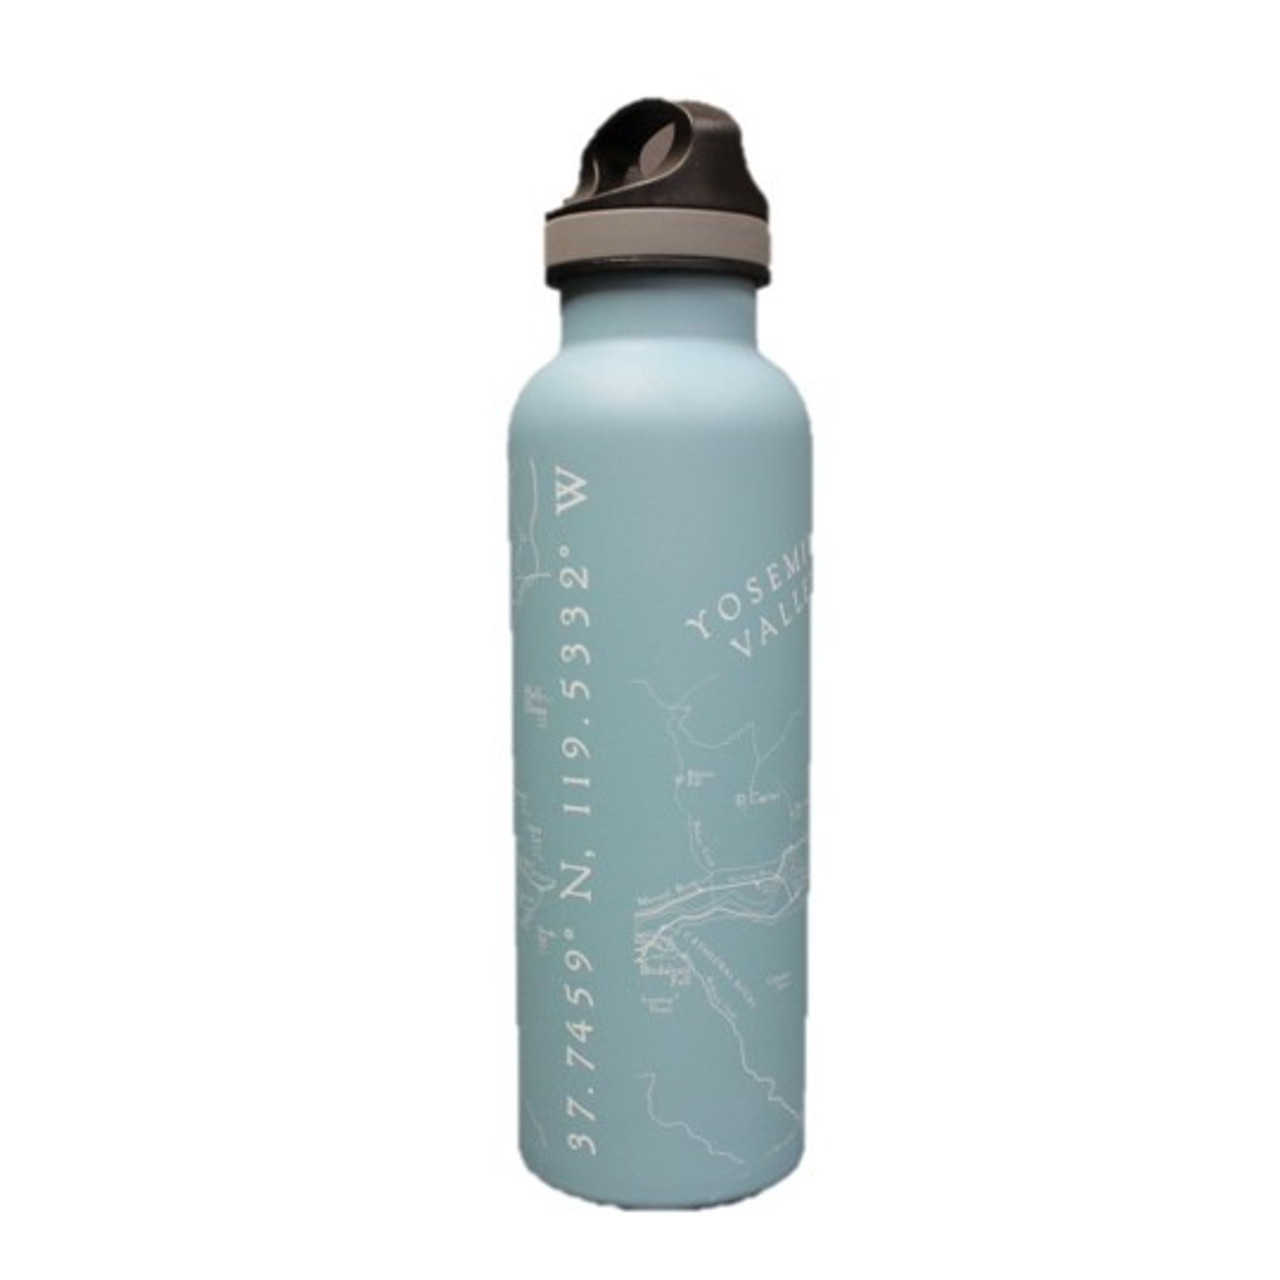 https://cdn11.bigcommerce.com/s-3roiyutxy/images/stencil/1280x1280/products/1270/2601/Yosemite-Valley-Map-Water-Bottle__S_3__43124.1681756279.jpg?c=1